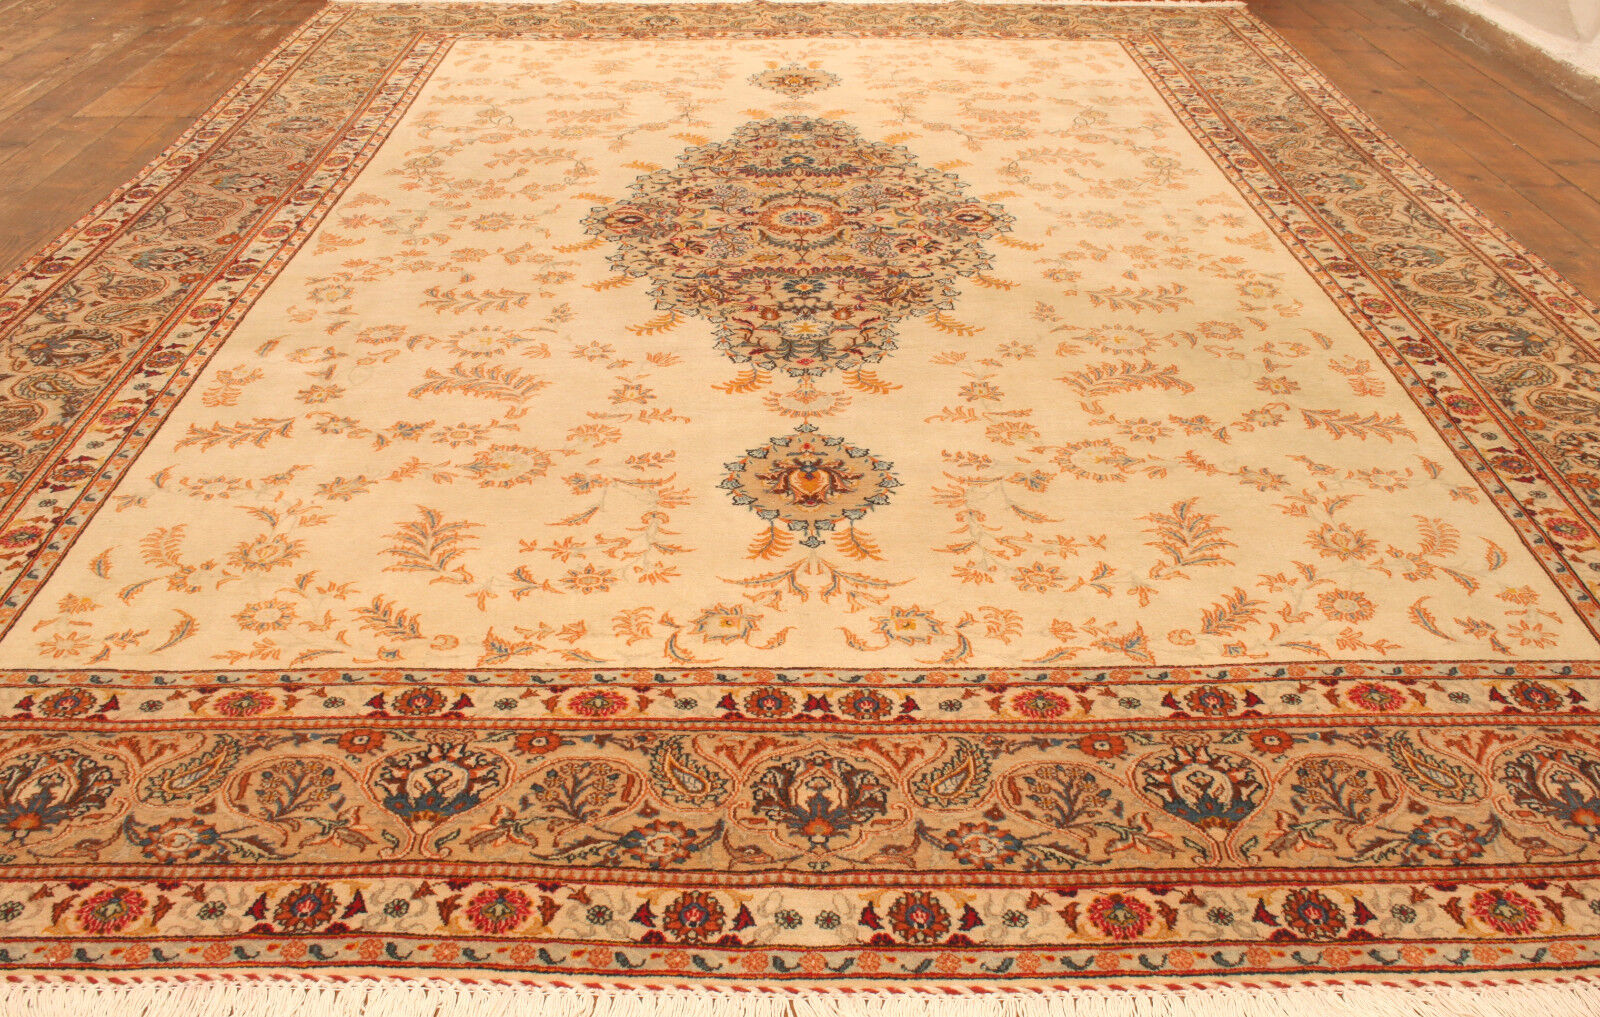 Back view of the Handmade Contemporary Persian Style Tabriz Rug showcasing craftsmanship